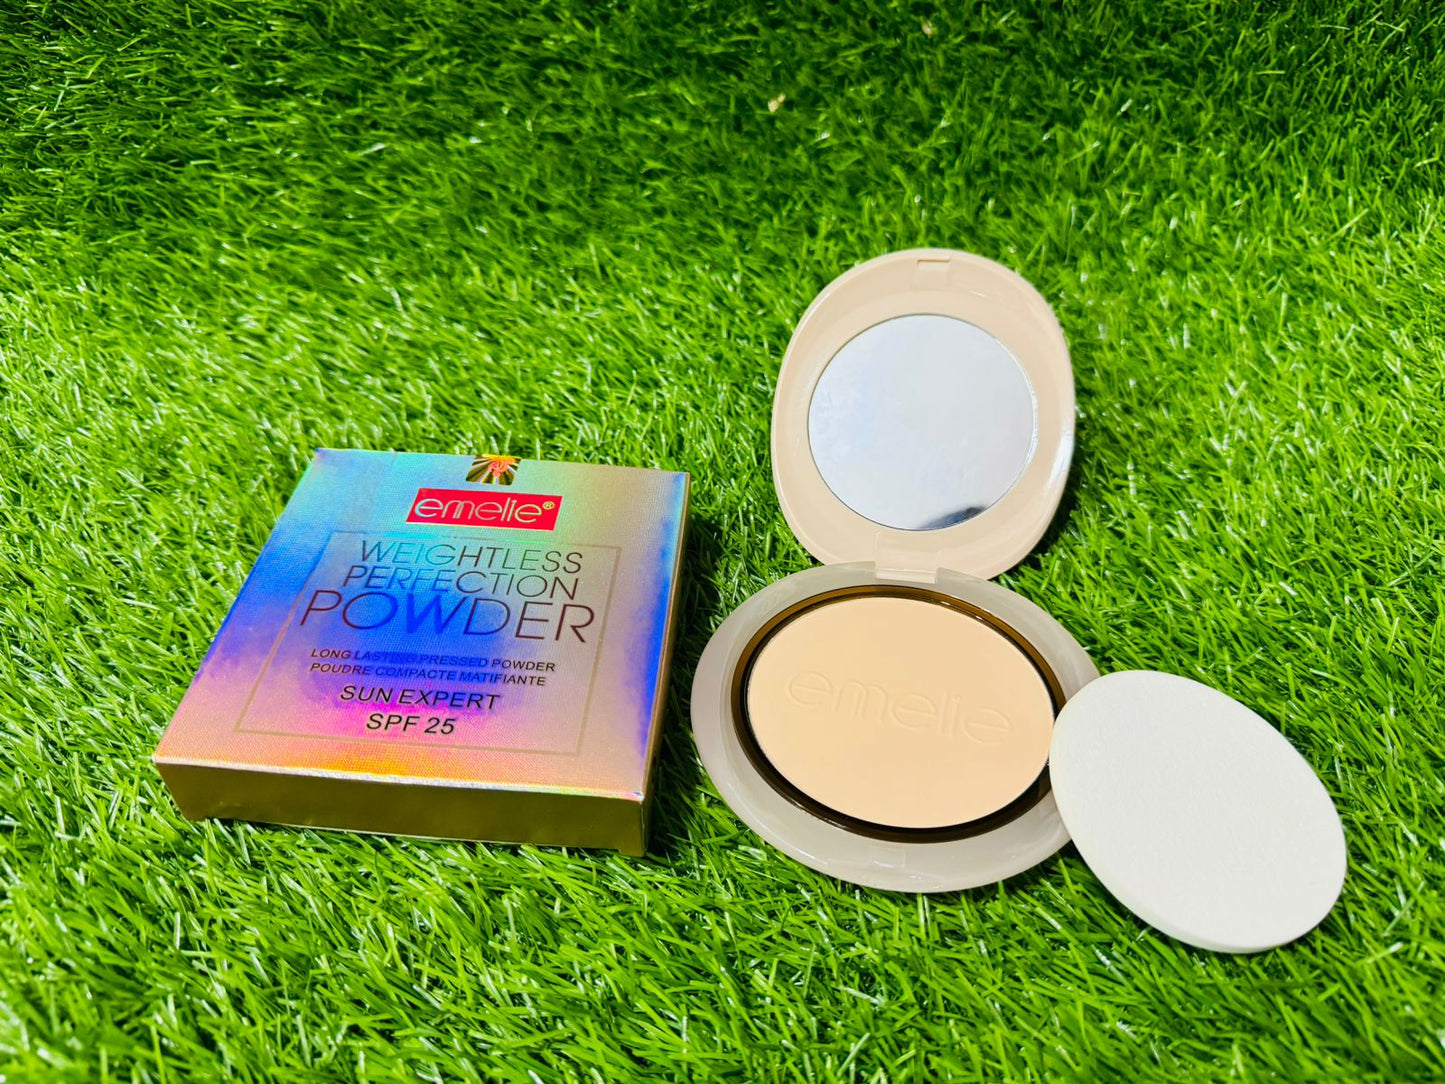 Emelie Cosmetics - Weightless Perfection Compact Powder